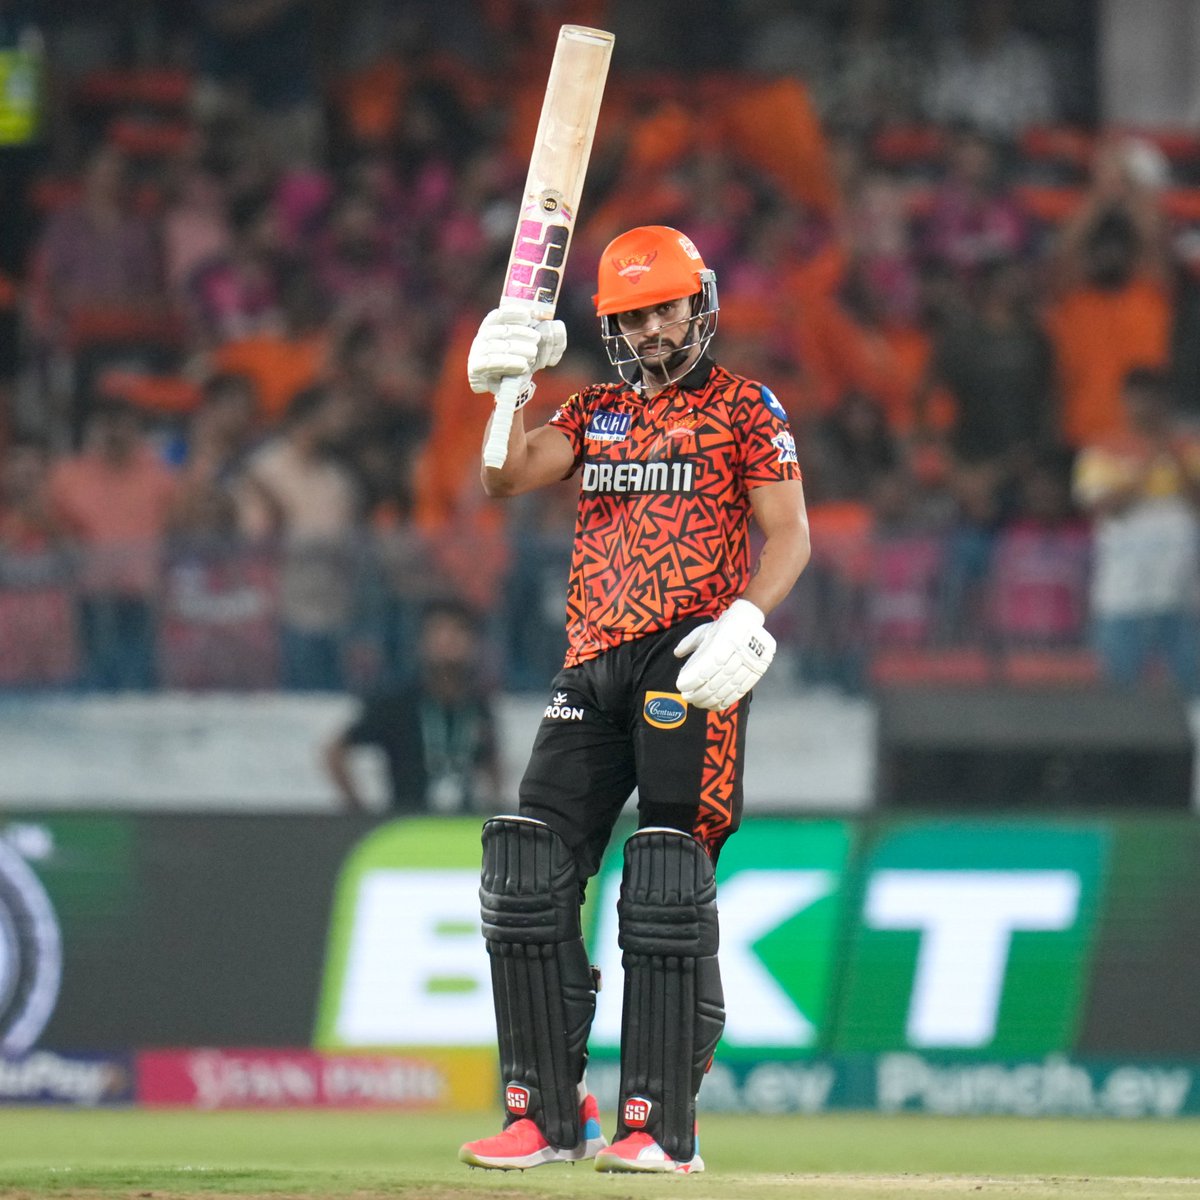 Nitish Kumar Reddy becomes the highest bod player in Andhra Premier league history. 

He goes back to play for Godavari Titans at price of 15.6 lkhs. 

#OrangeArmy @manaapl